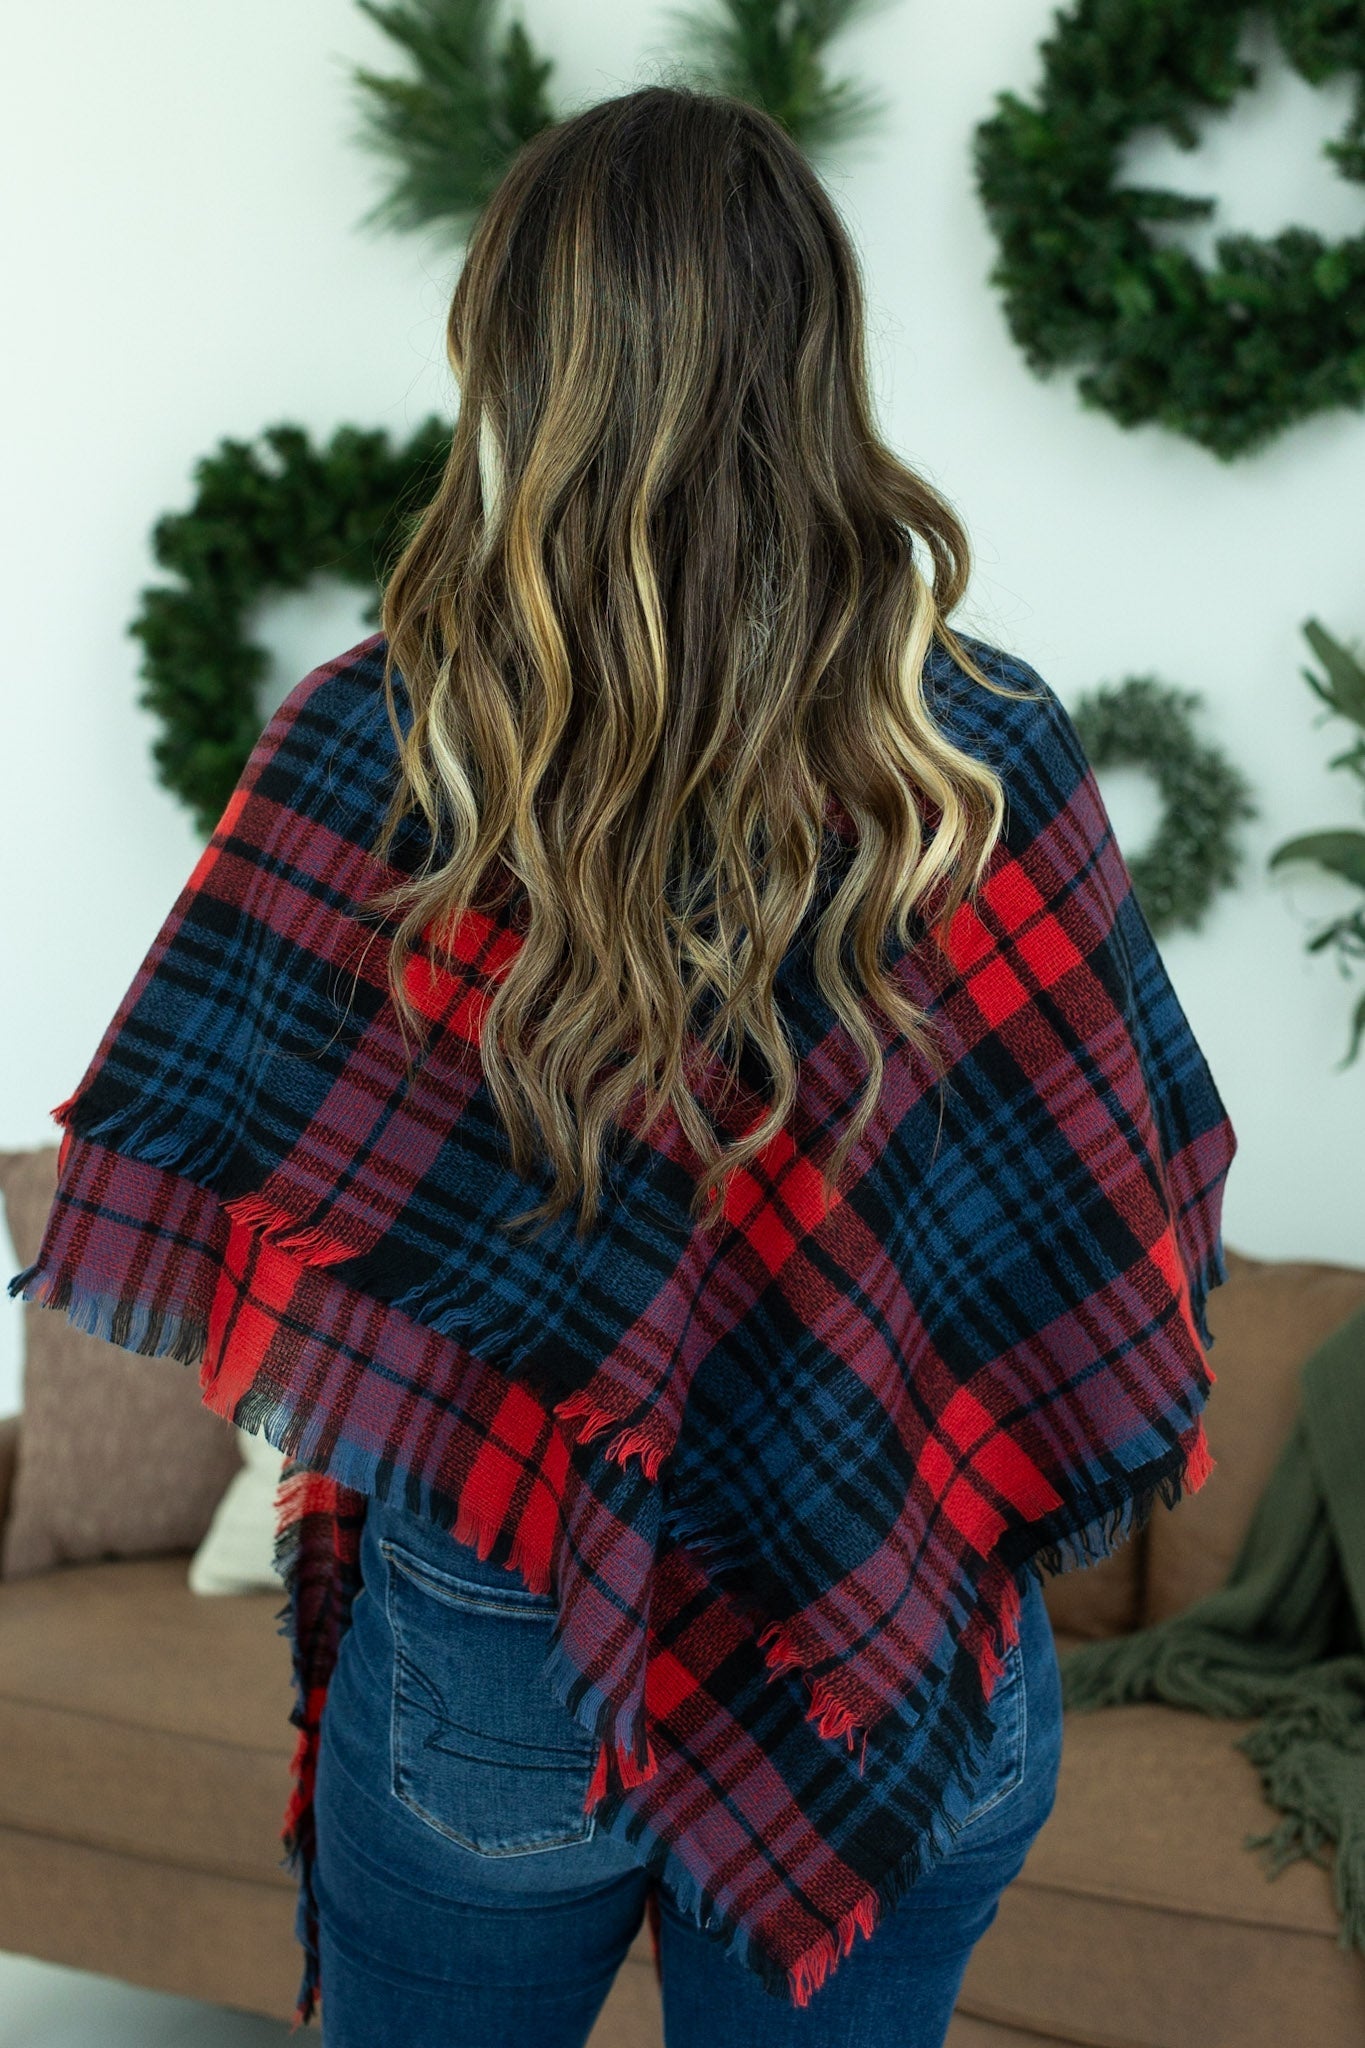 Blanket Scarf - Red, Blue and Black Plaid